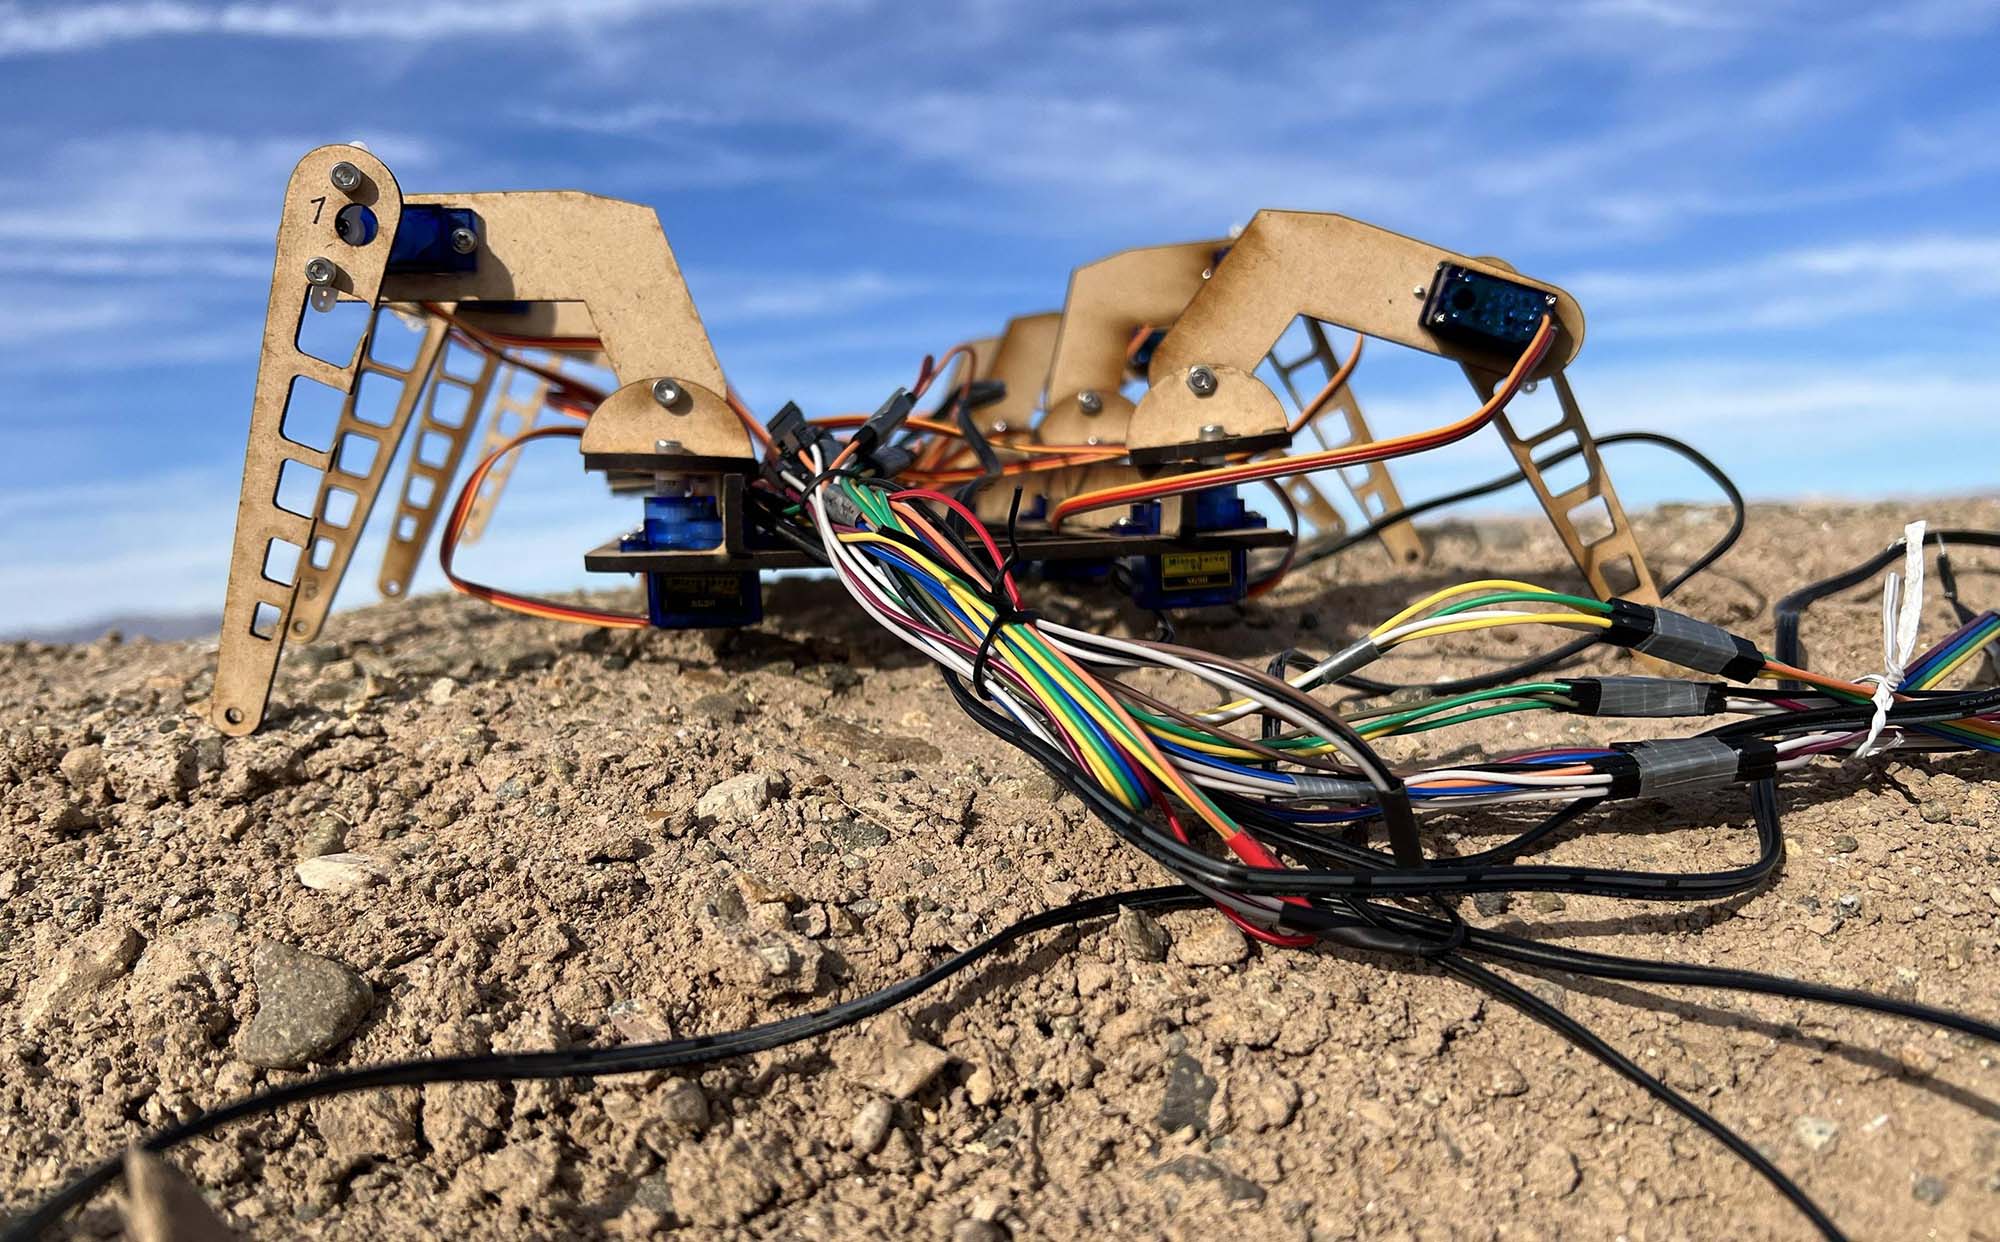 A spider-like robot on a small sand hill, made of laser cut wooden shapes with wires and circuits exposed